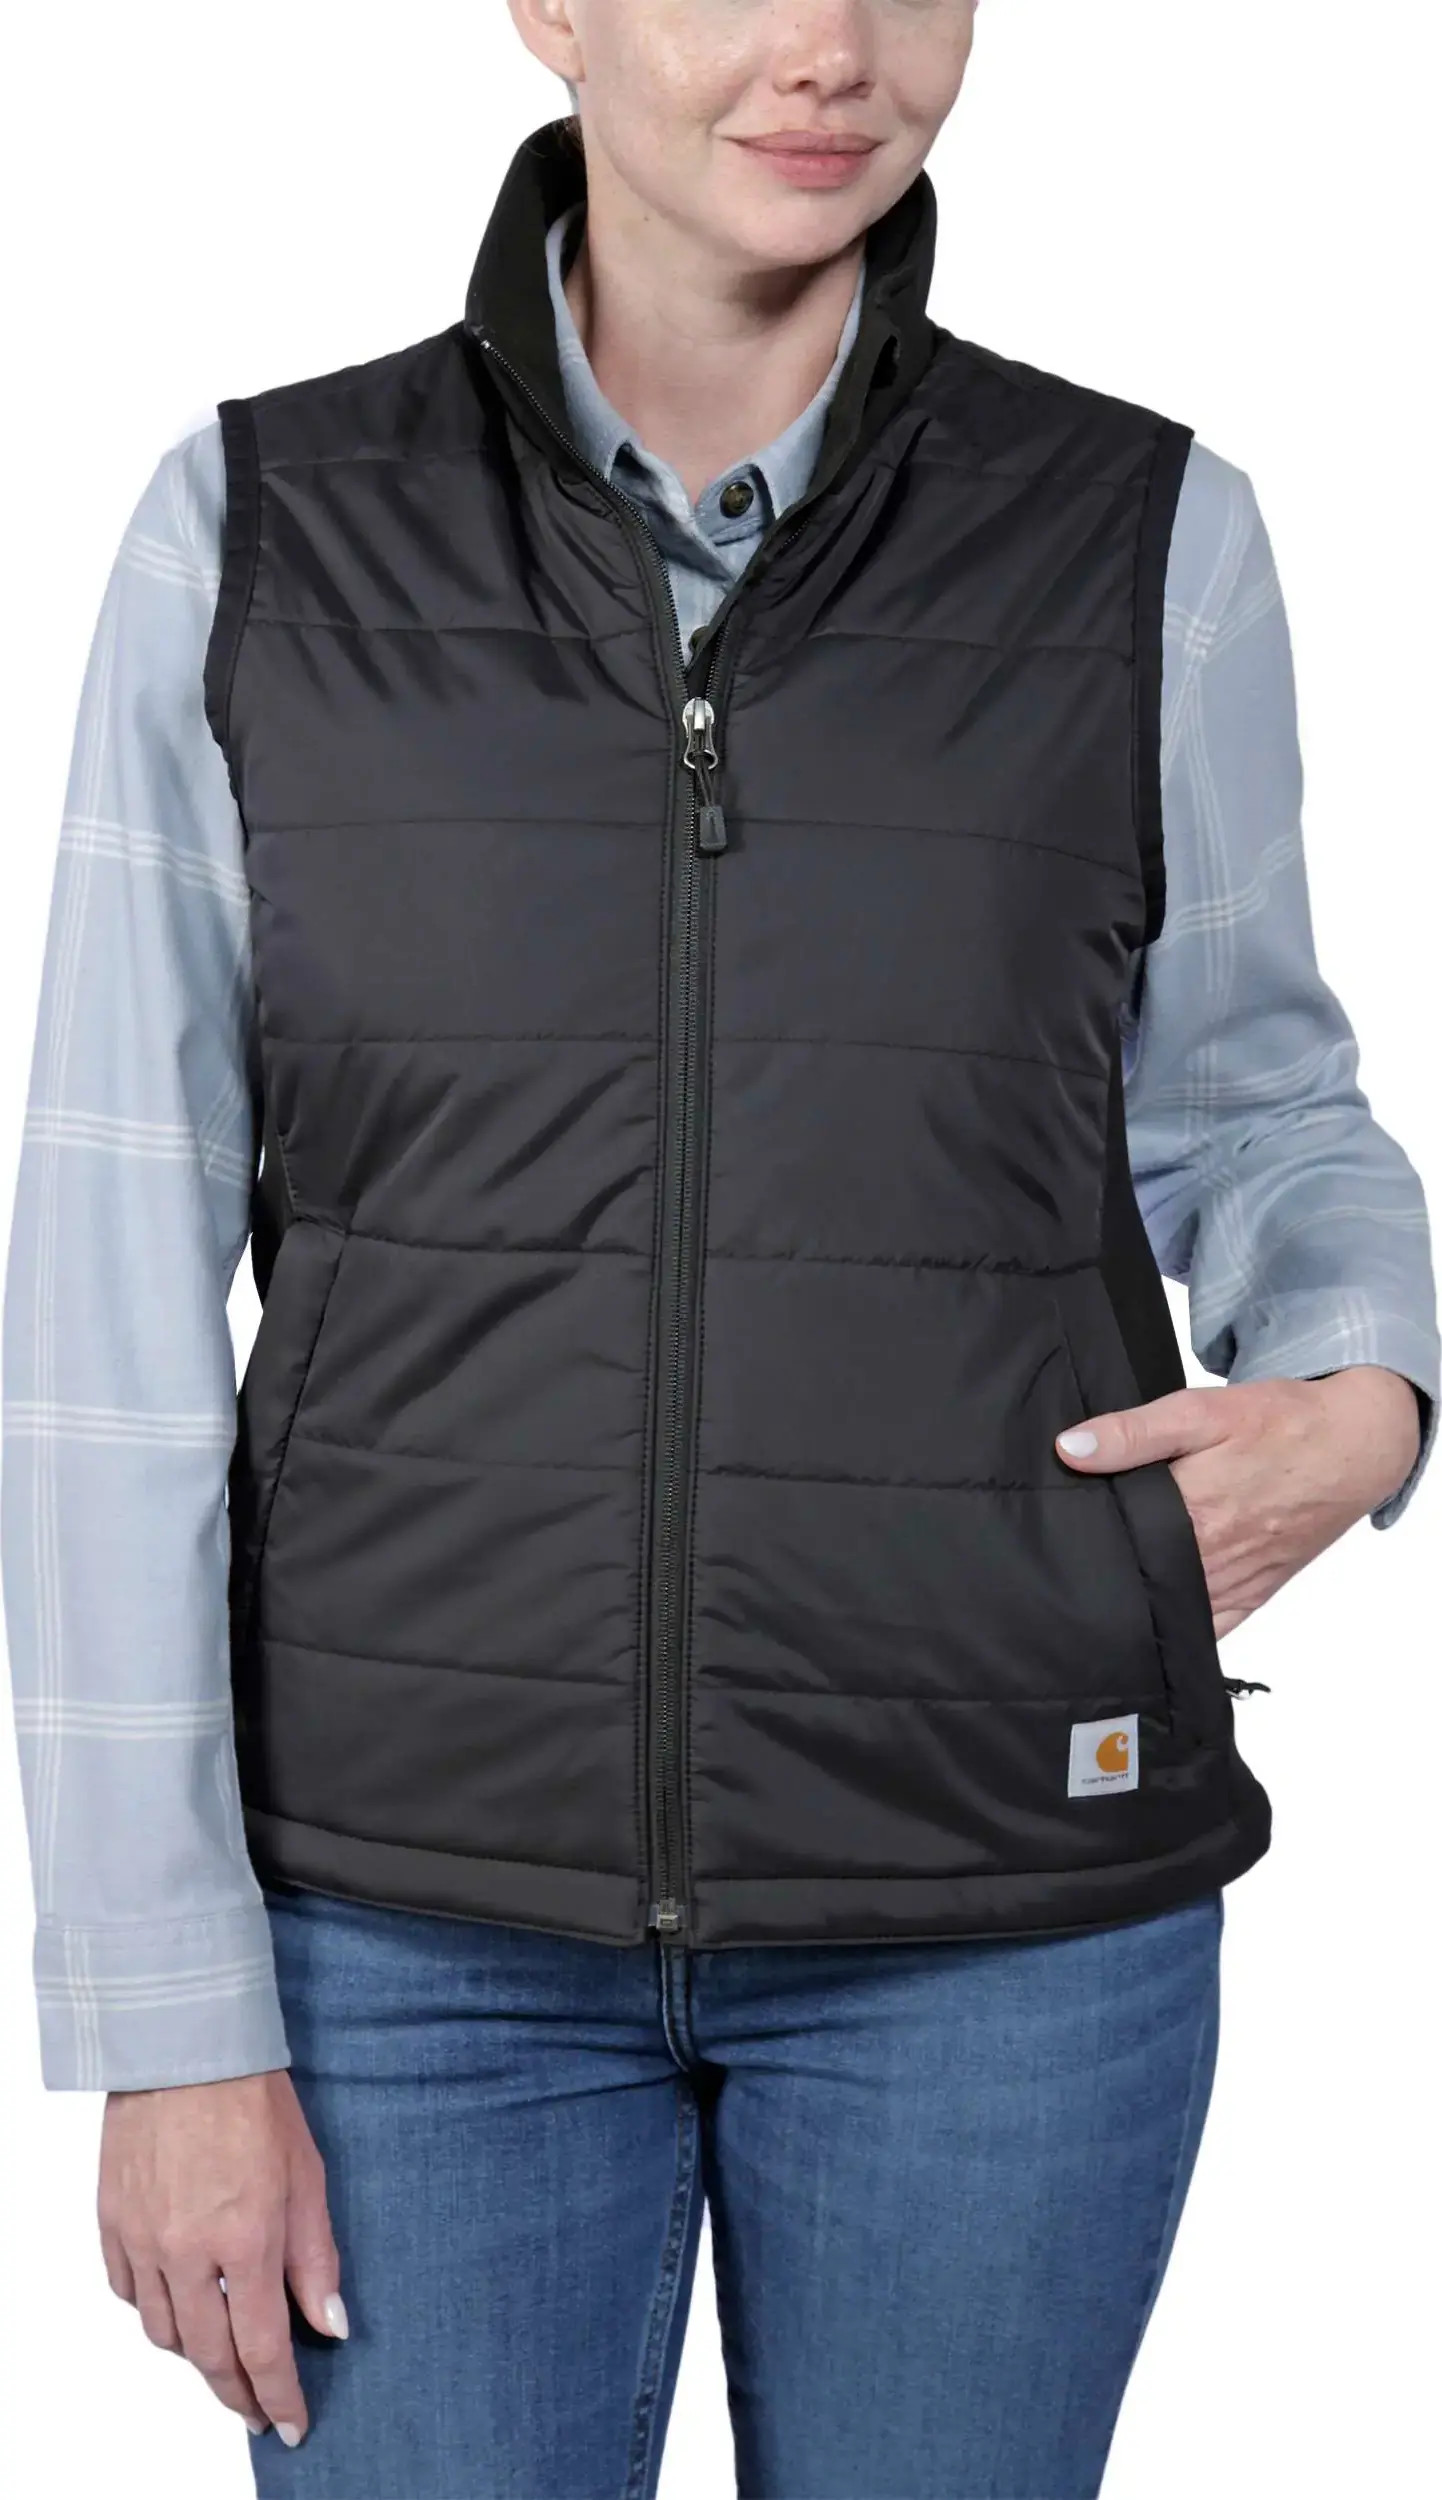 Women’s Relaxed Fit Lightweight Insulated Vest Black